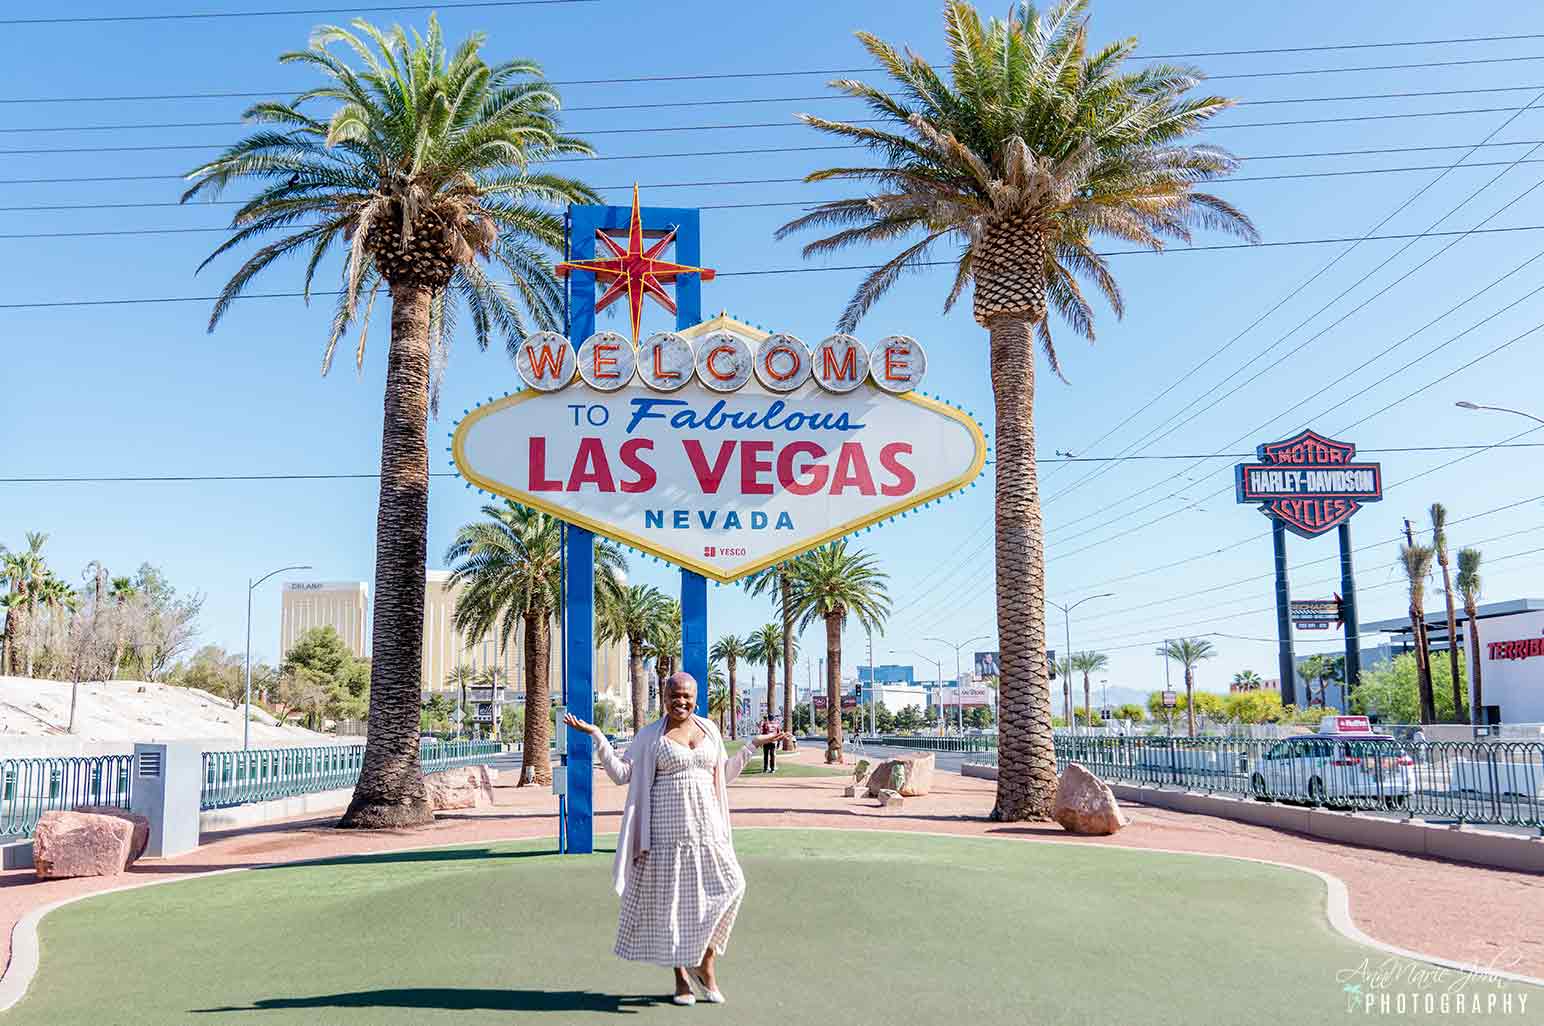 97 Fun Things to Do on the Las Vegas Strip - The Ultimate Bucket